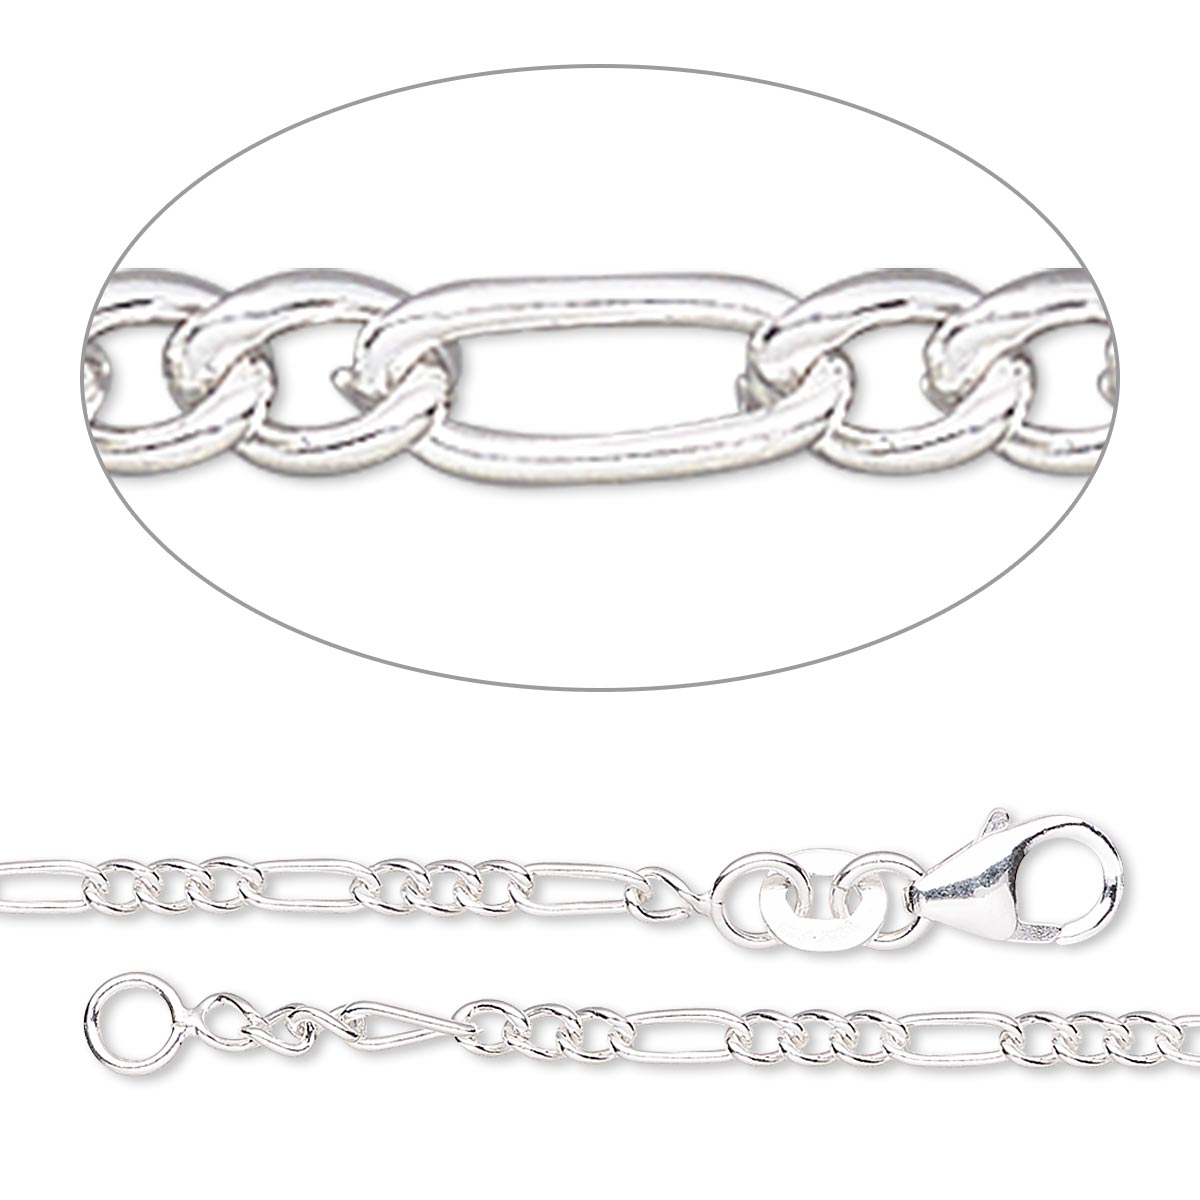 Chain, sterling silver-filled, 2.2mm Figaro, 36 inches with lobster ...